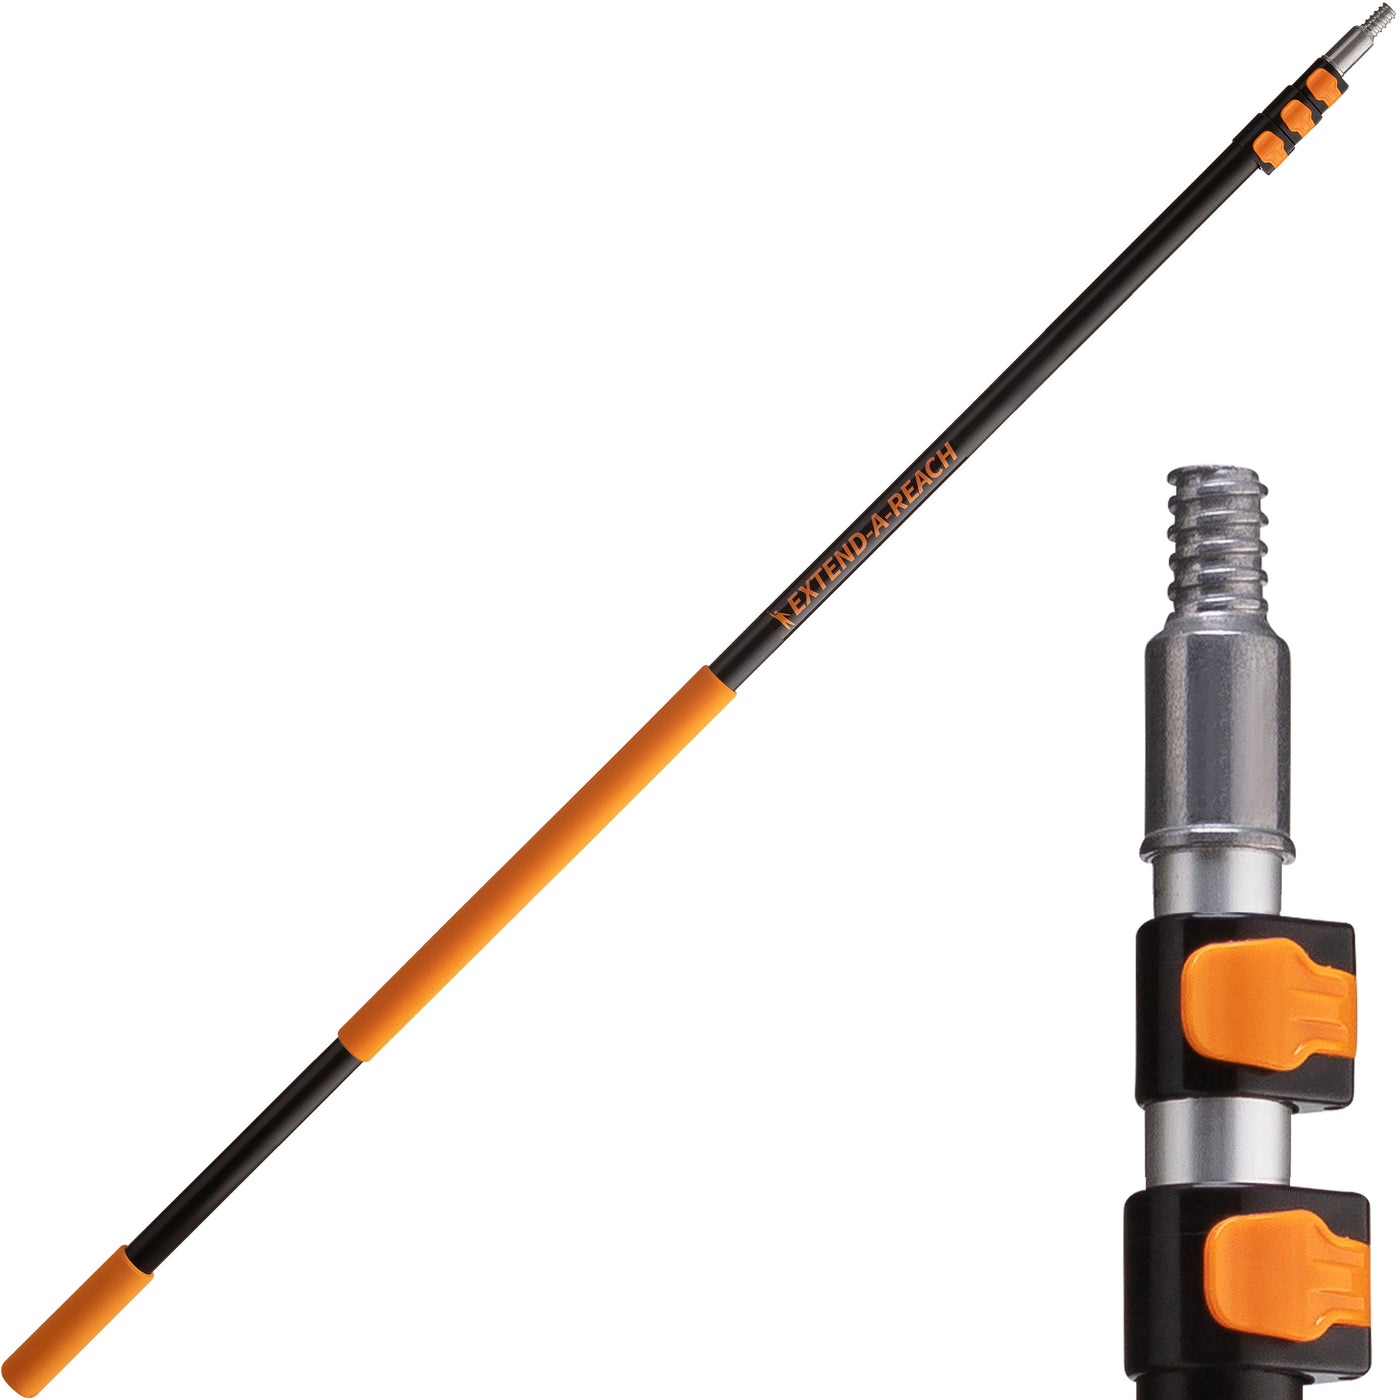 7-30 ft Long Telescopic Extension Pole with Universal Twist-on Metal Tip